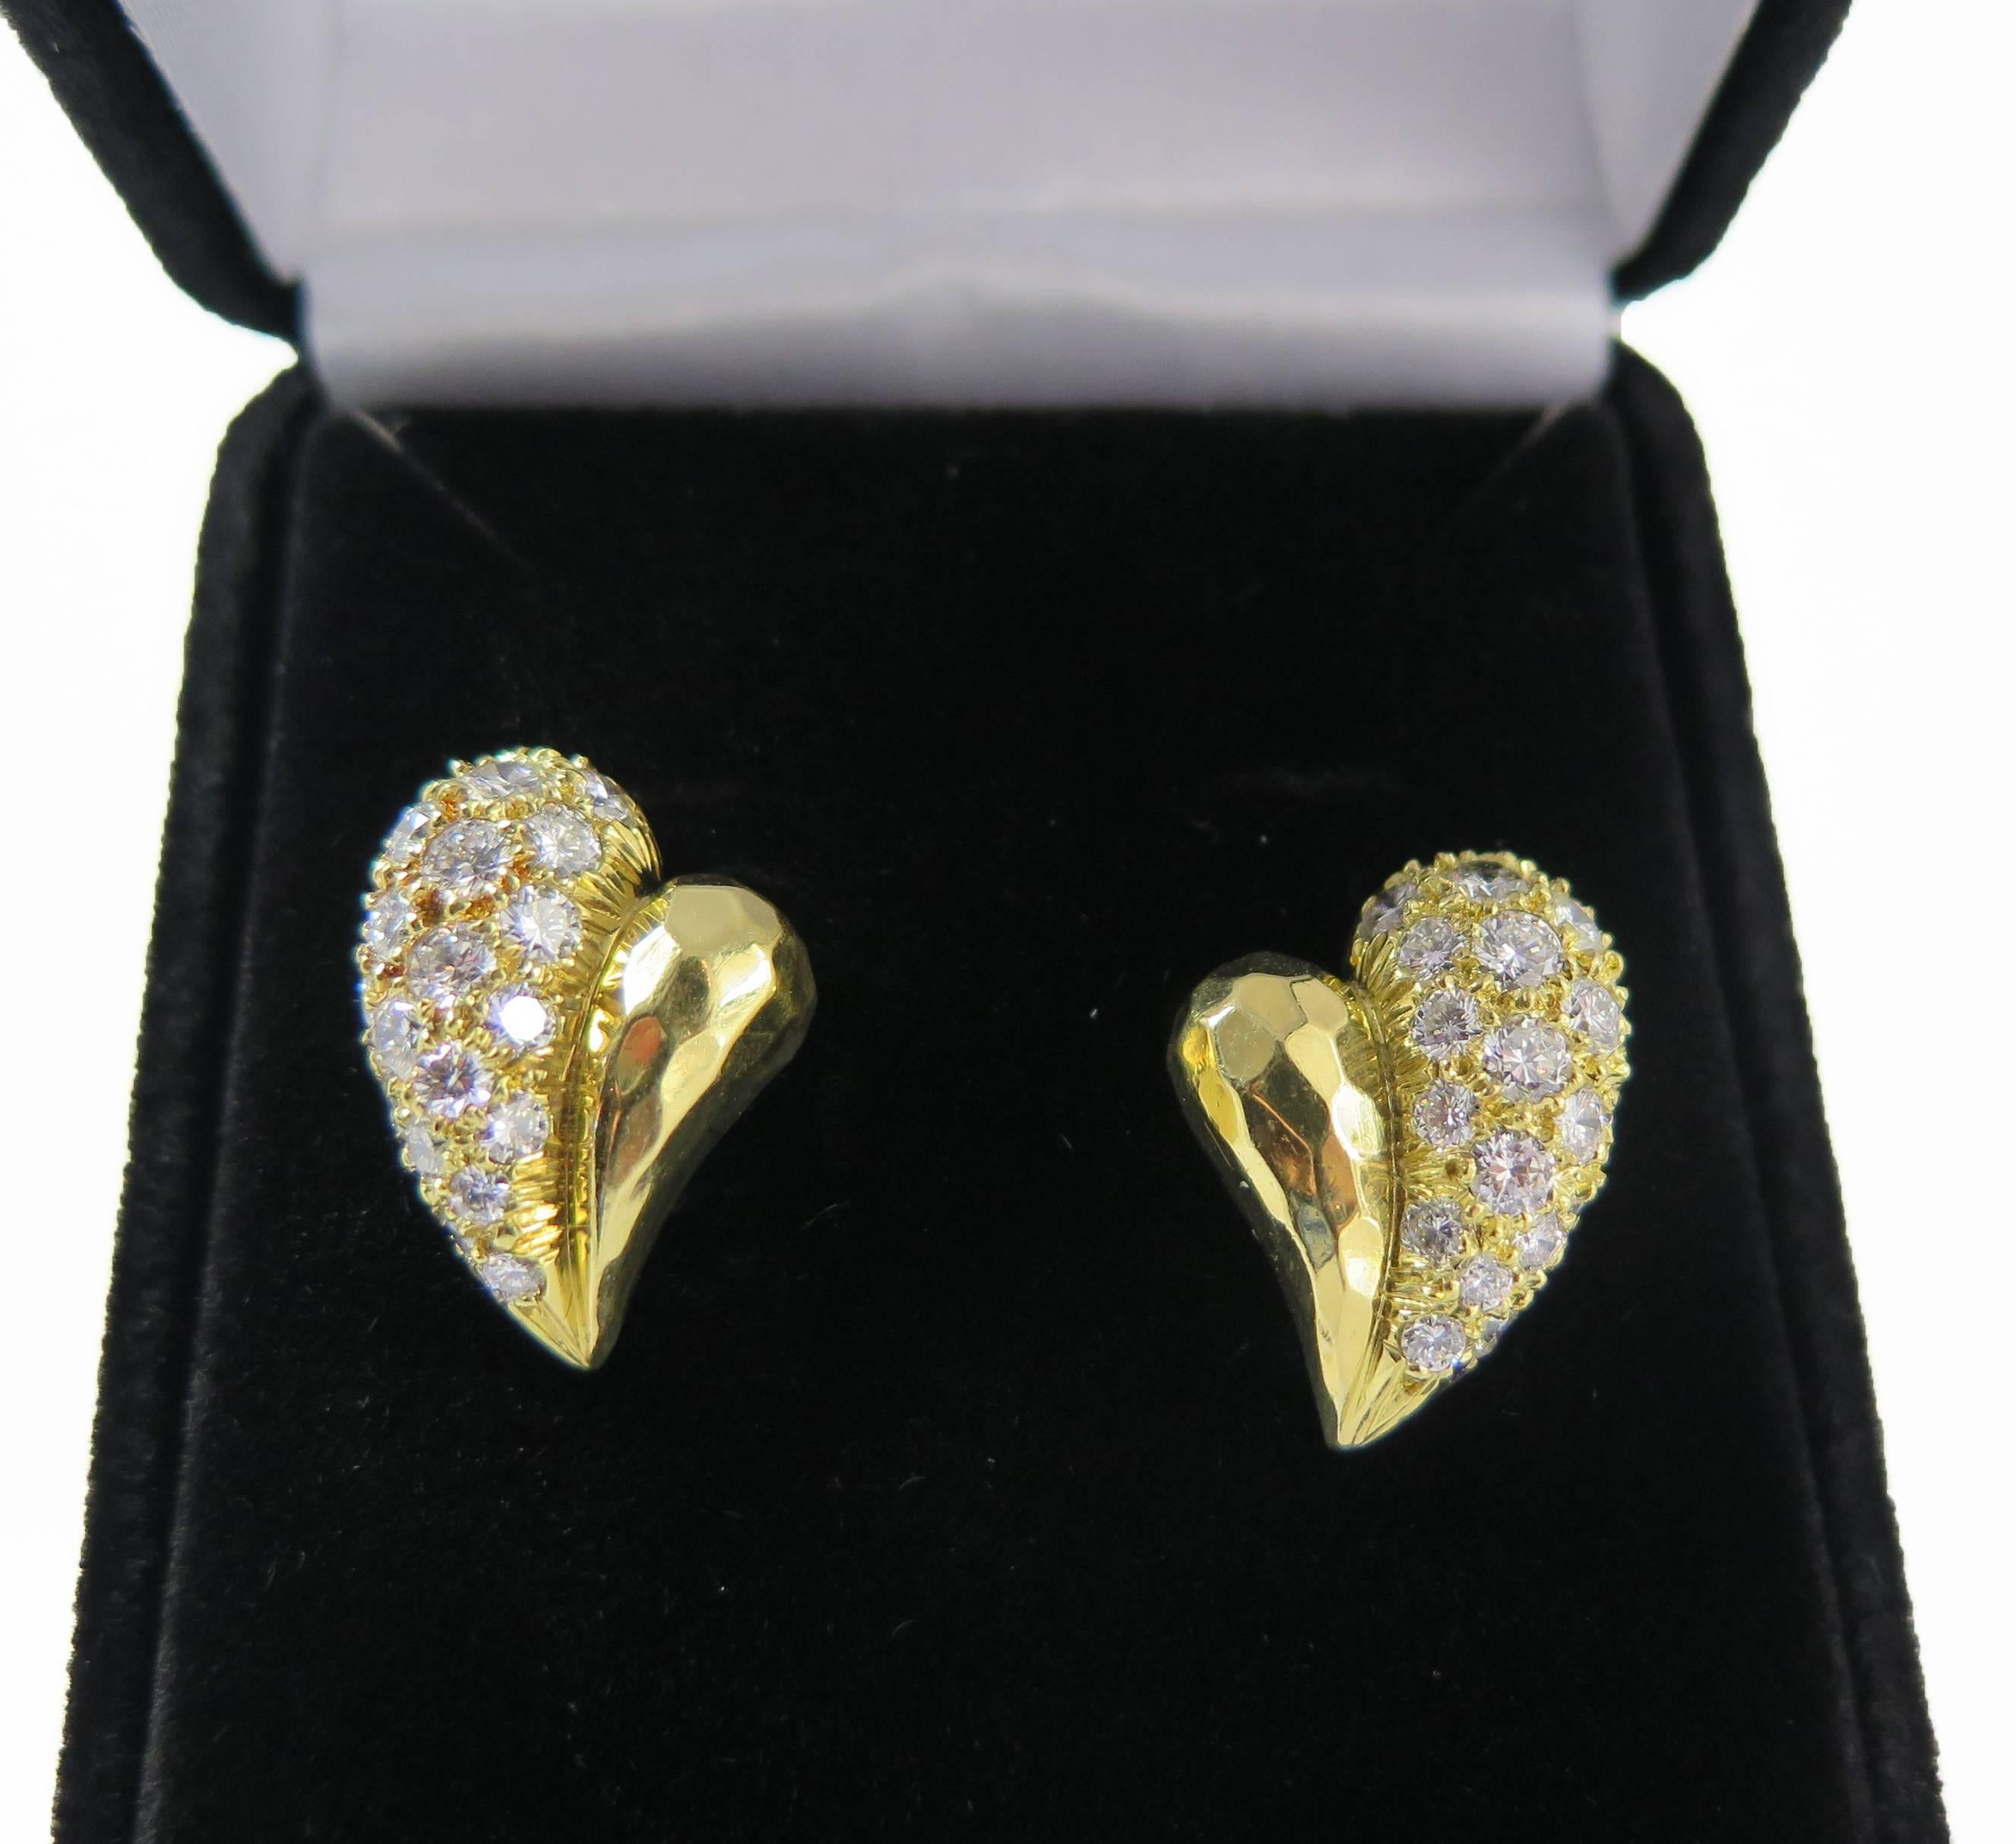 Beautiful pair of heart shape hand hammered 18K gold with diamonds earrings by Henry Dunay with post back. Diamonds are G/VS quality. Signed 